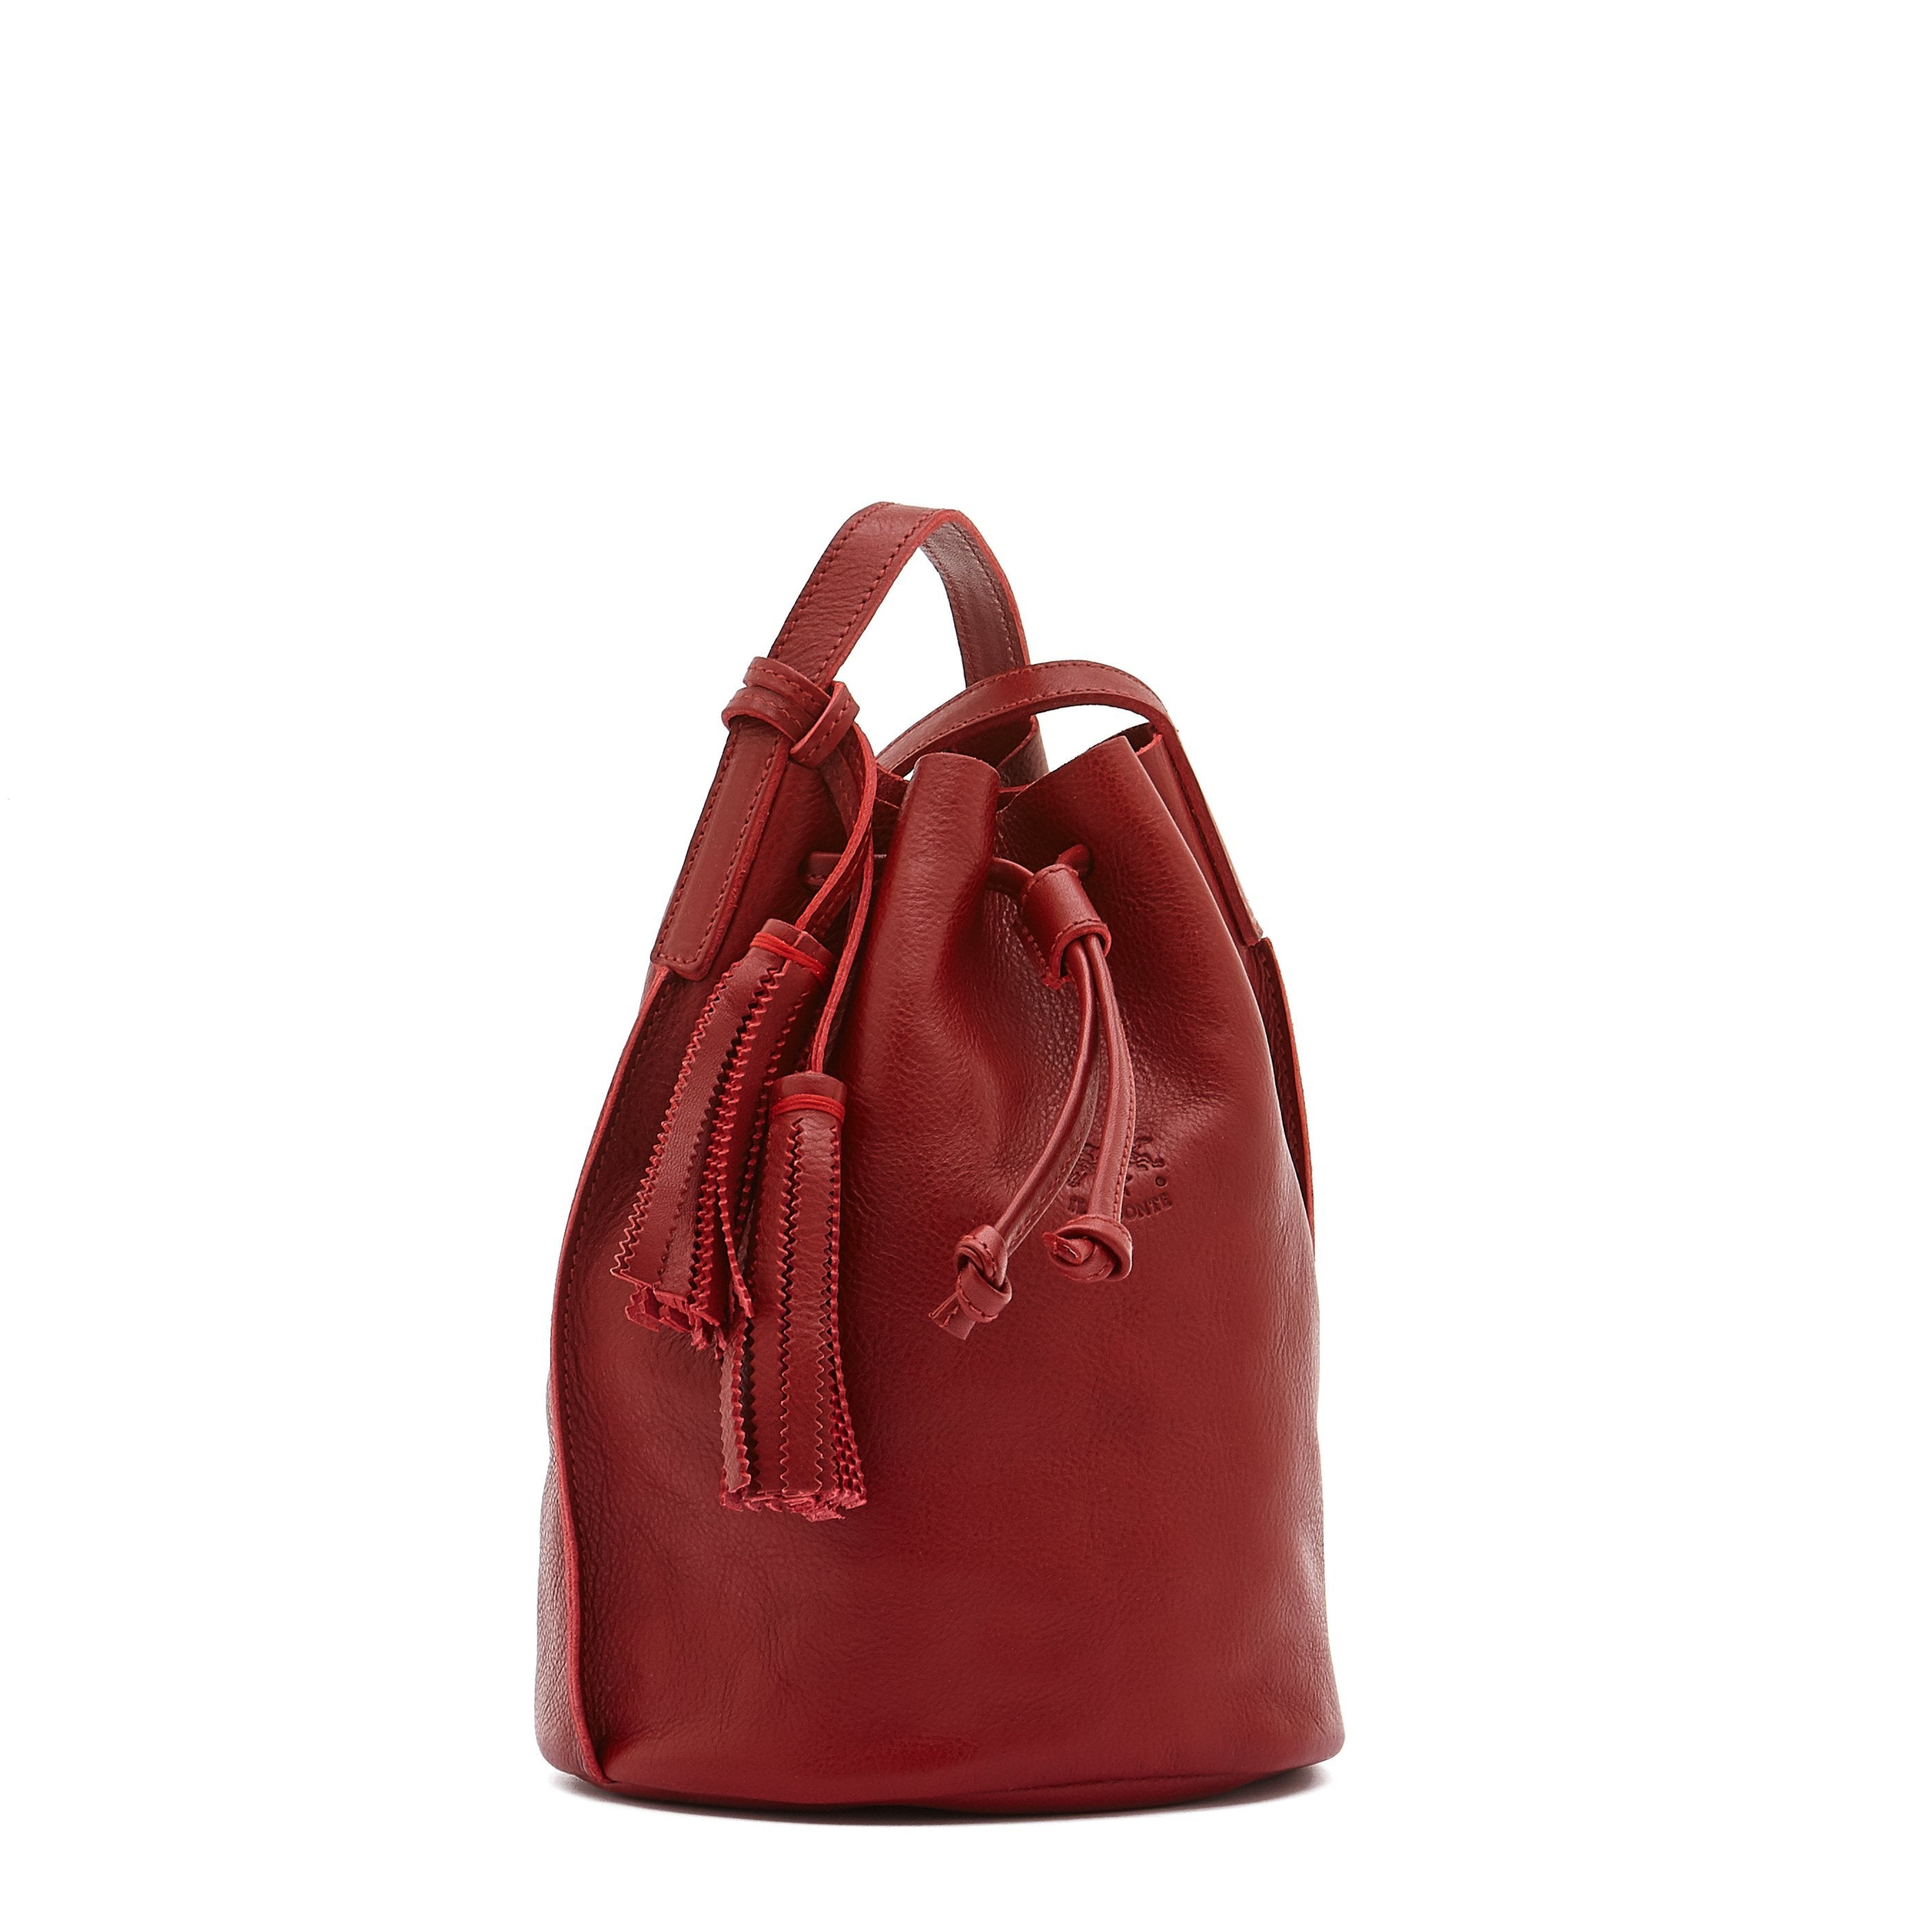 Silvia | Women's bucket bag in leather color red